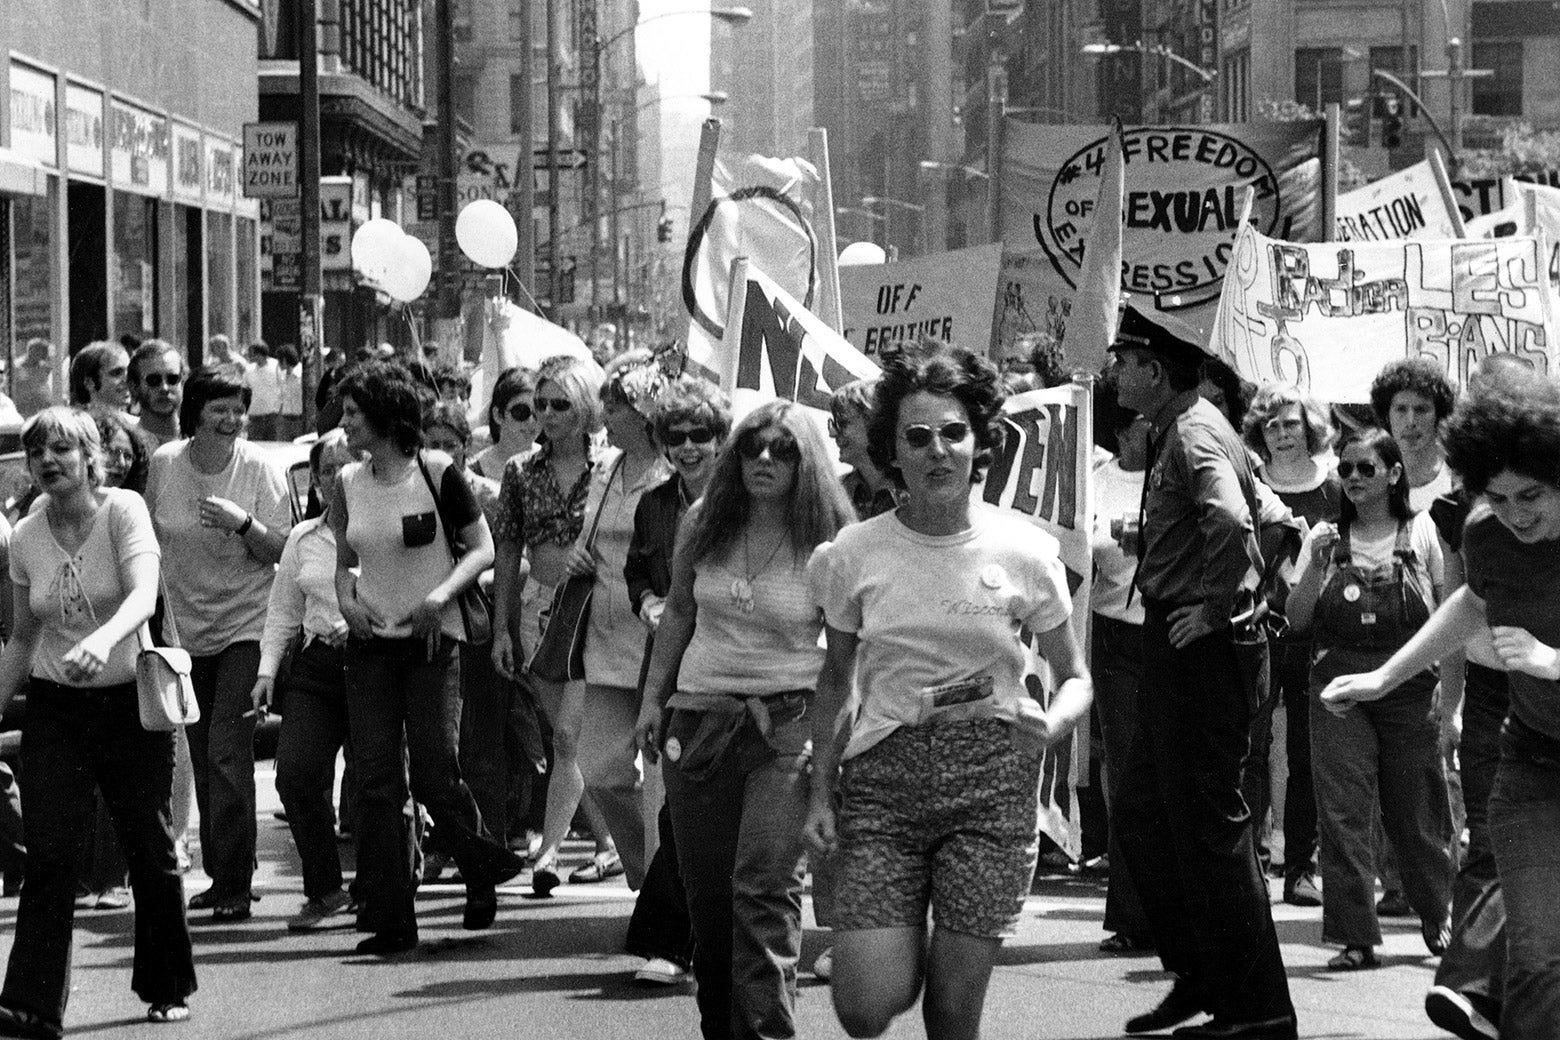 People march on the street for a gay liberation parade.